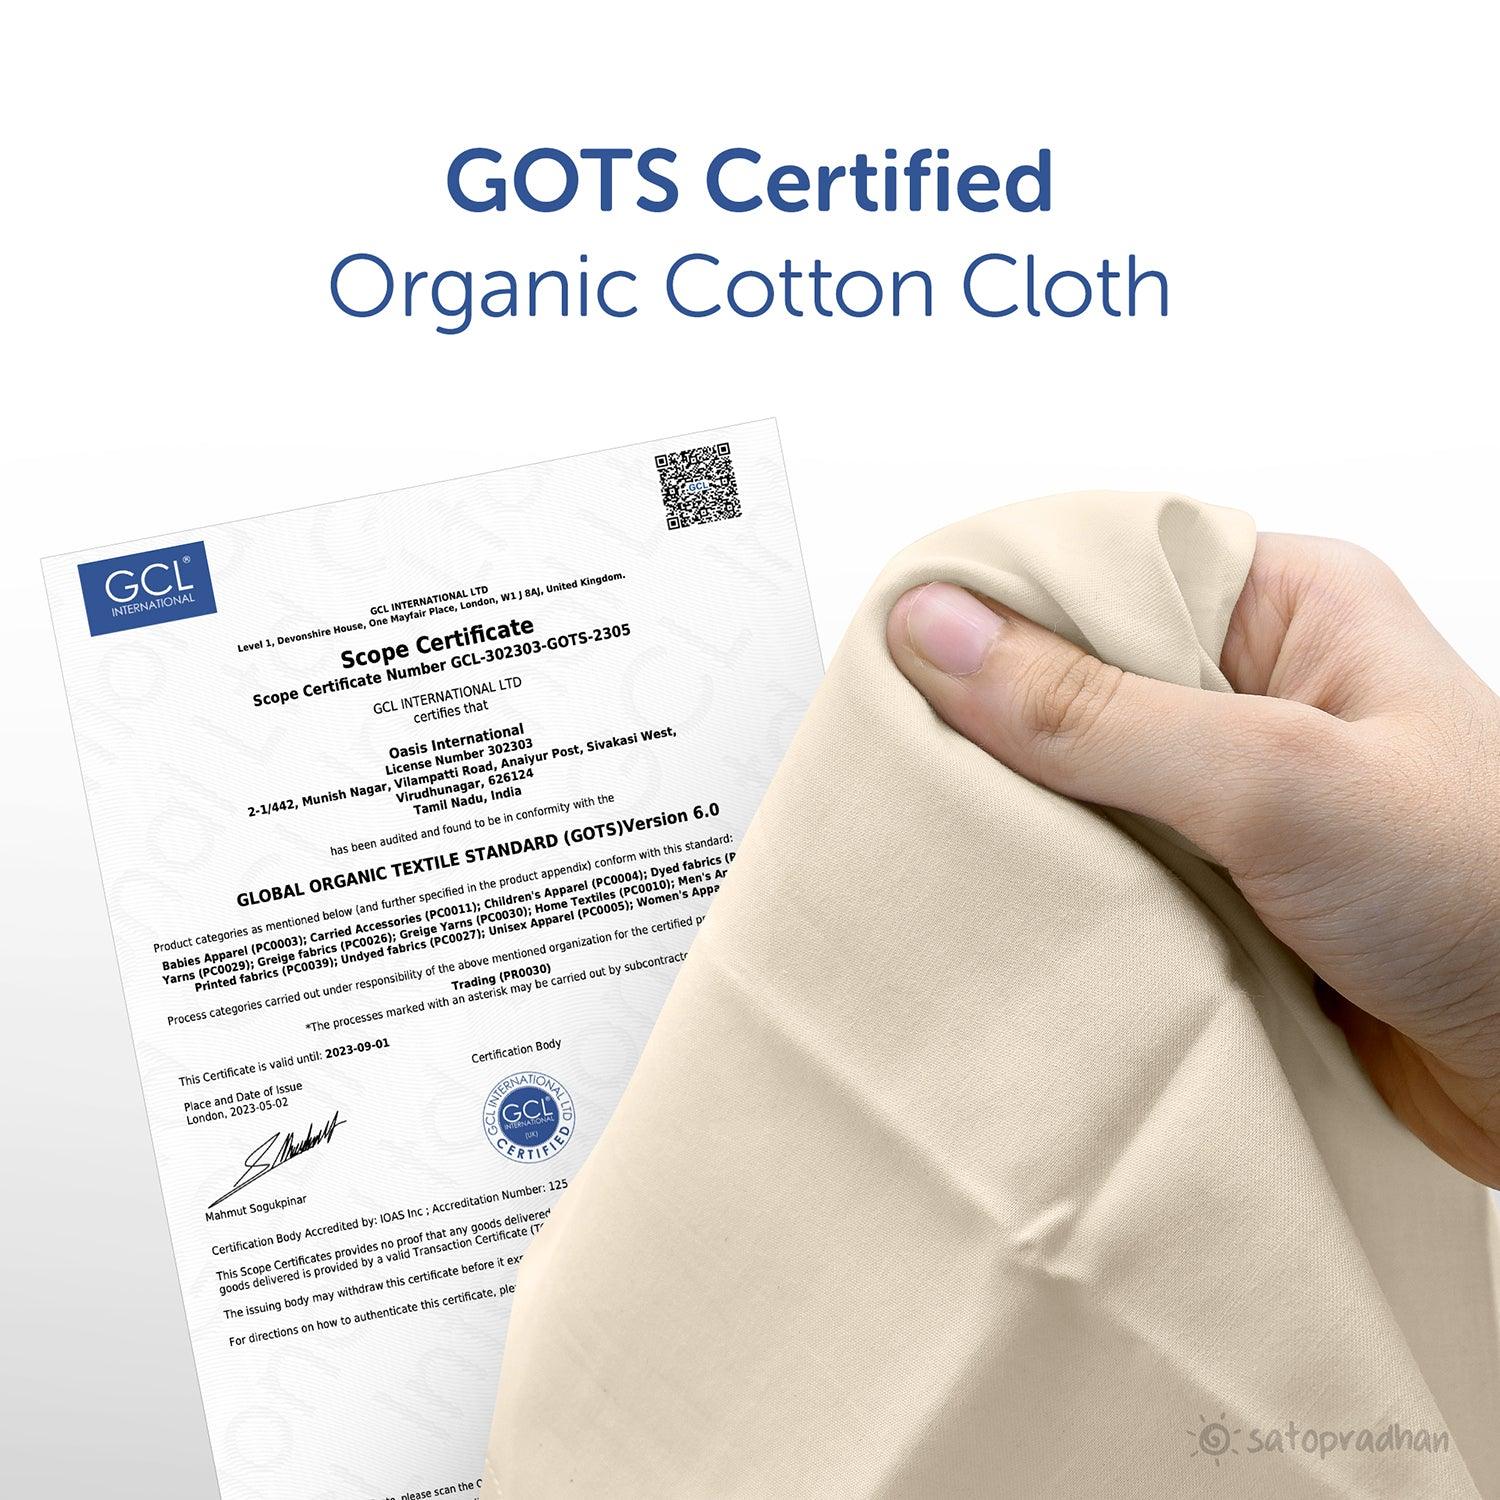 Hankies are made from the GOTS certified Organic cotton fabric